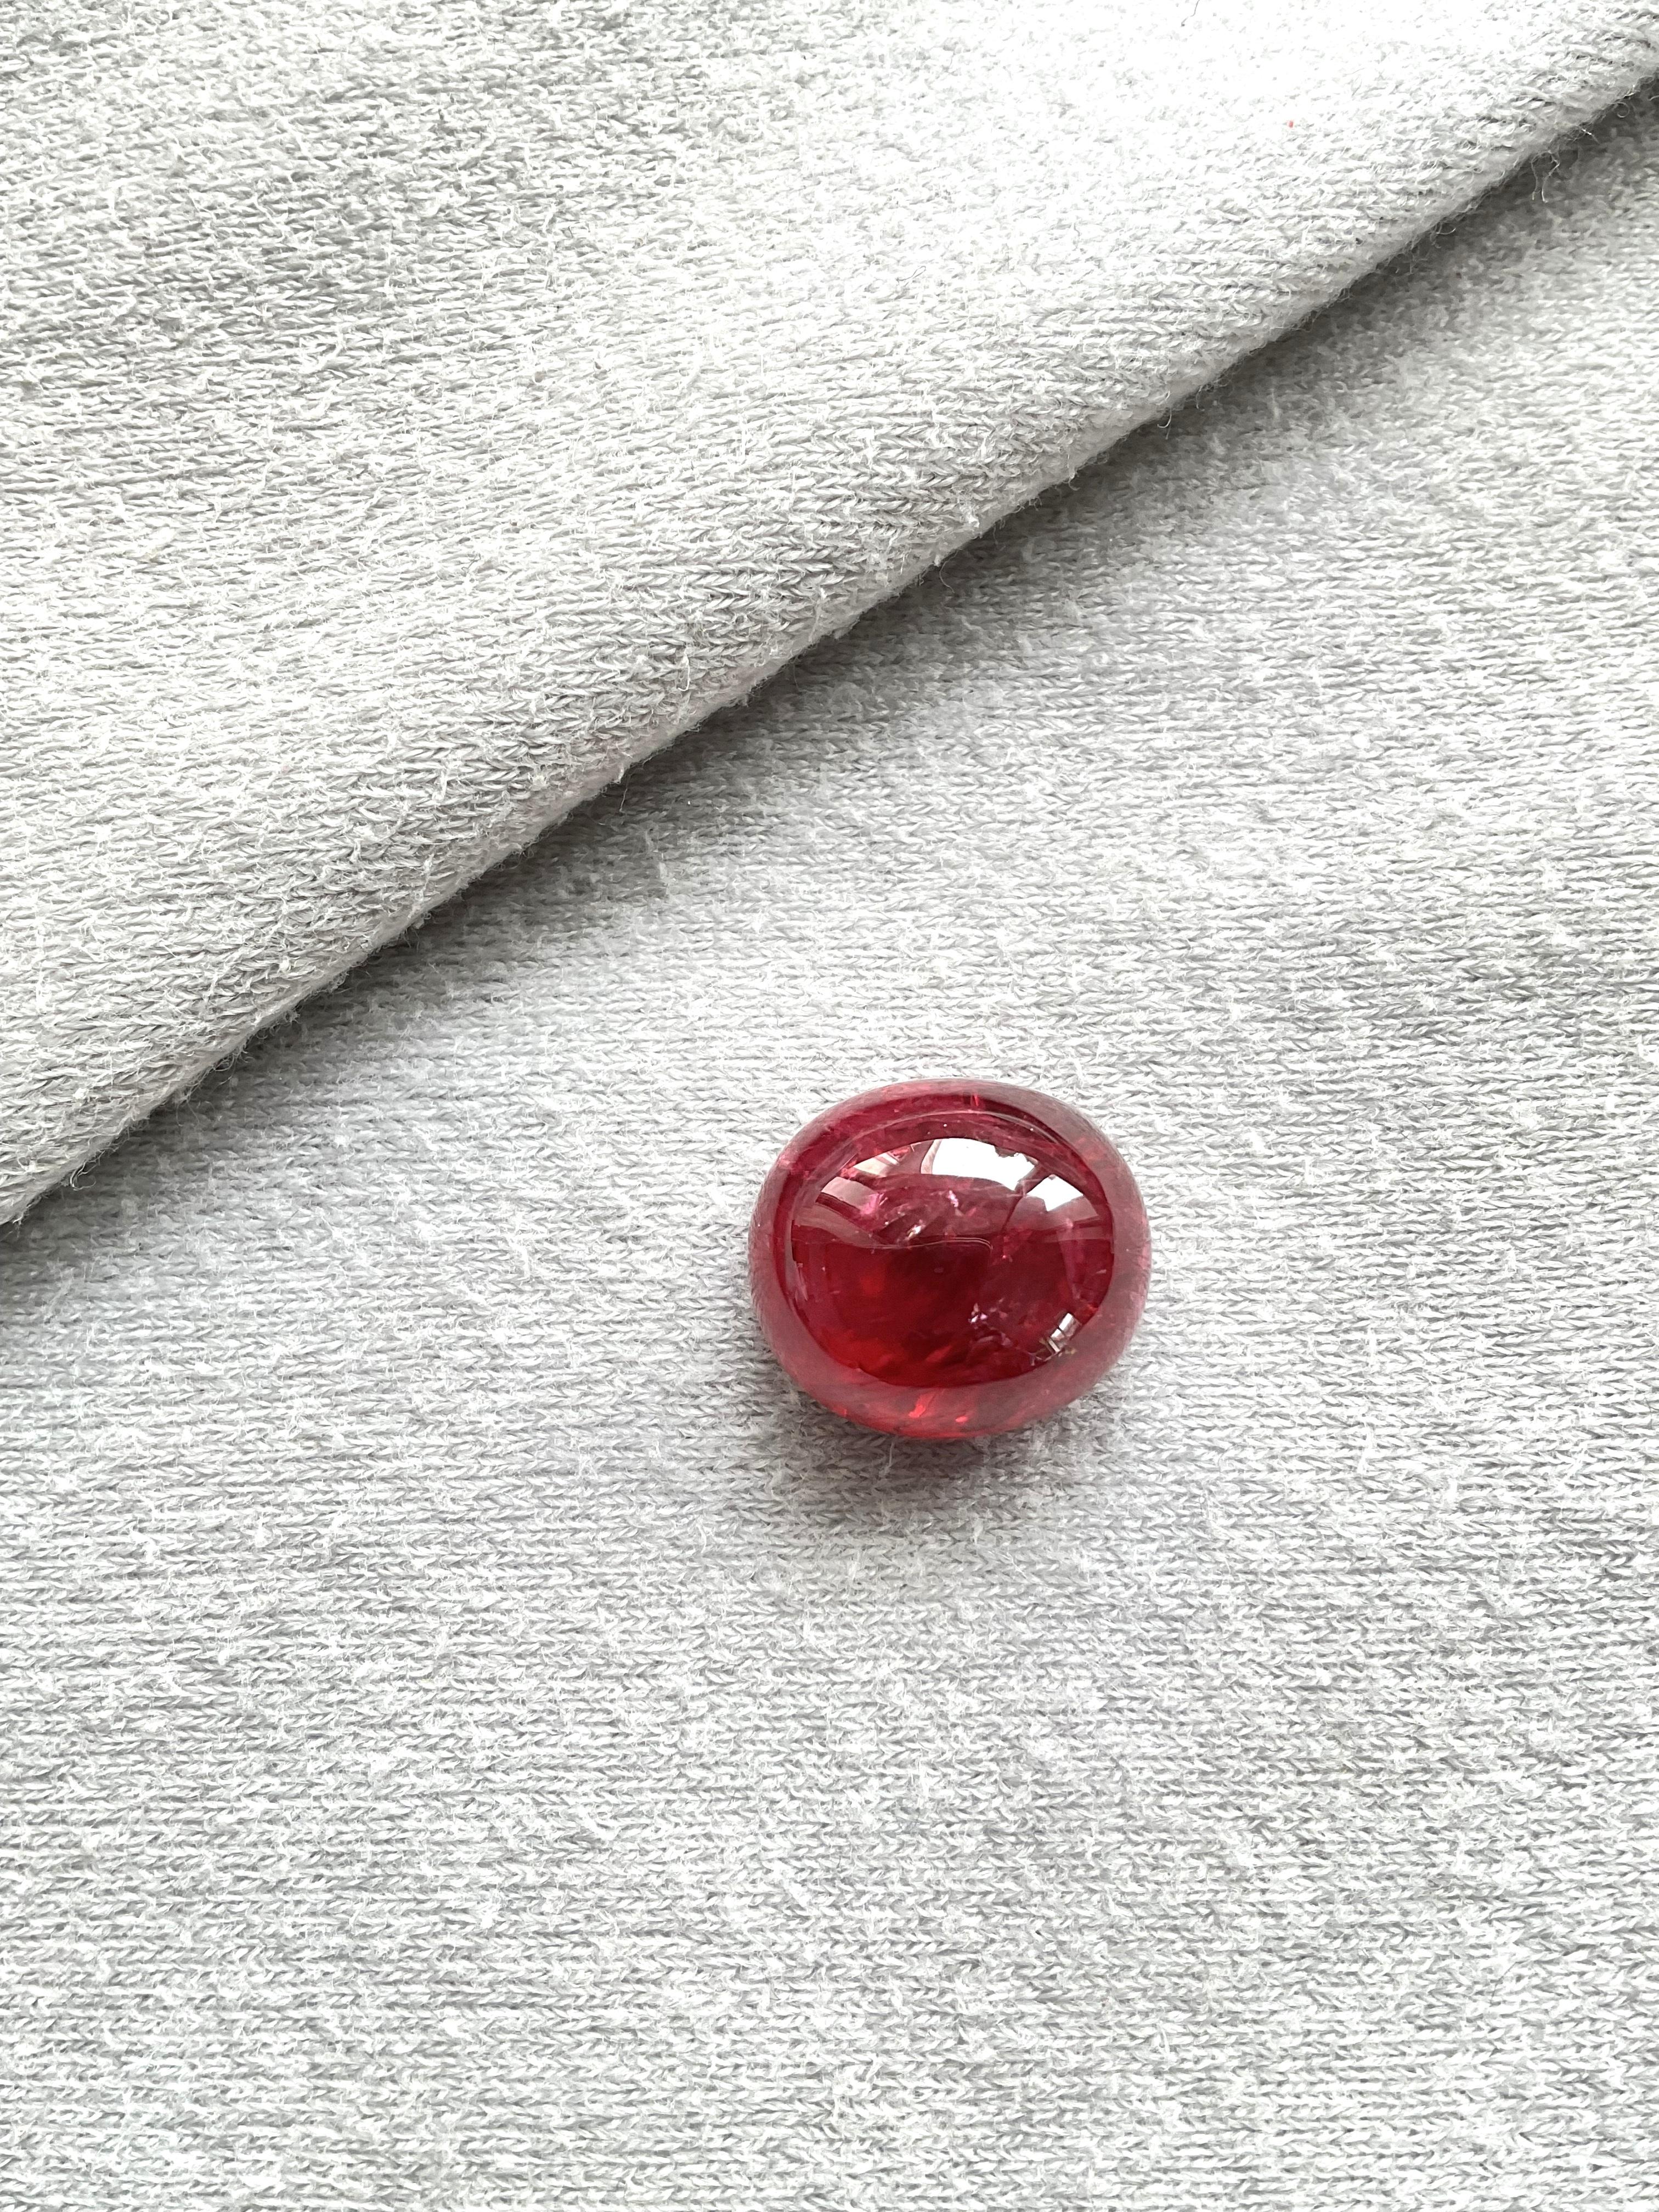 15.71 Carat Burmese Top Quality Spinel Cabochon for Fine Jewellery Natural Gems
Piece - 1
Weight - 15.71 Ct
Size - 12.8x14.4 mm
Shape - Cabochon